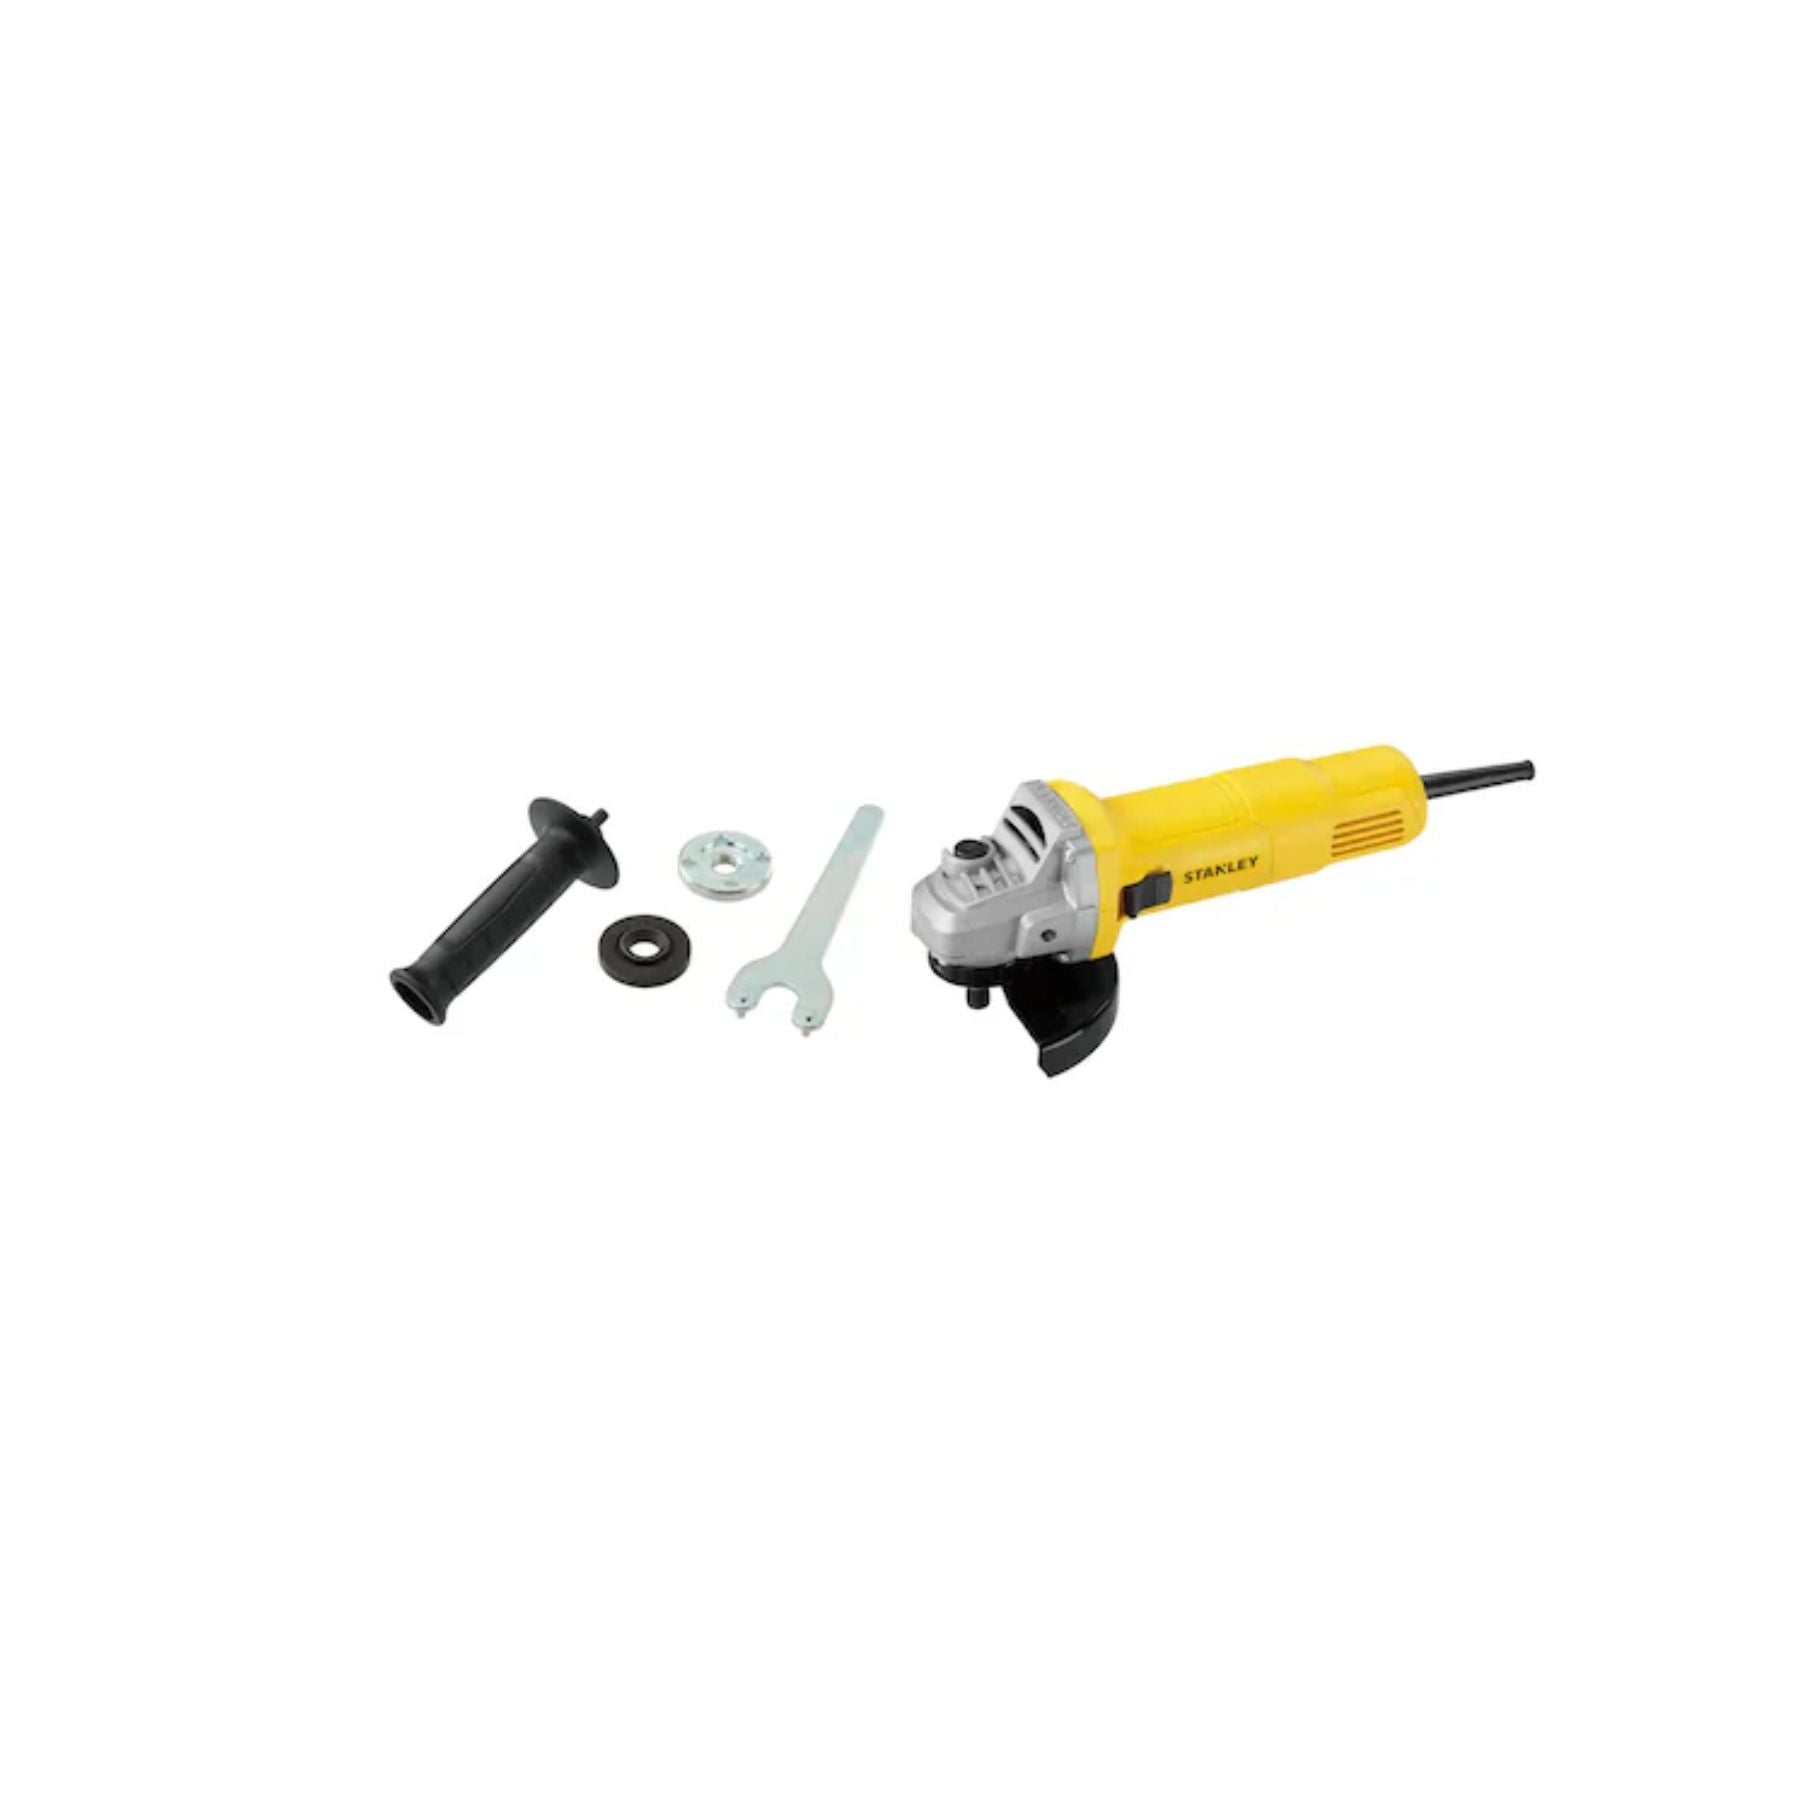 Stanley (SG6100-IN) 620W 100 mm Slim Small Angle Grinder (New)